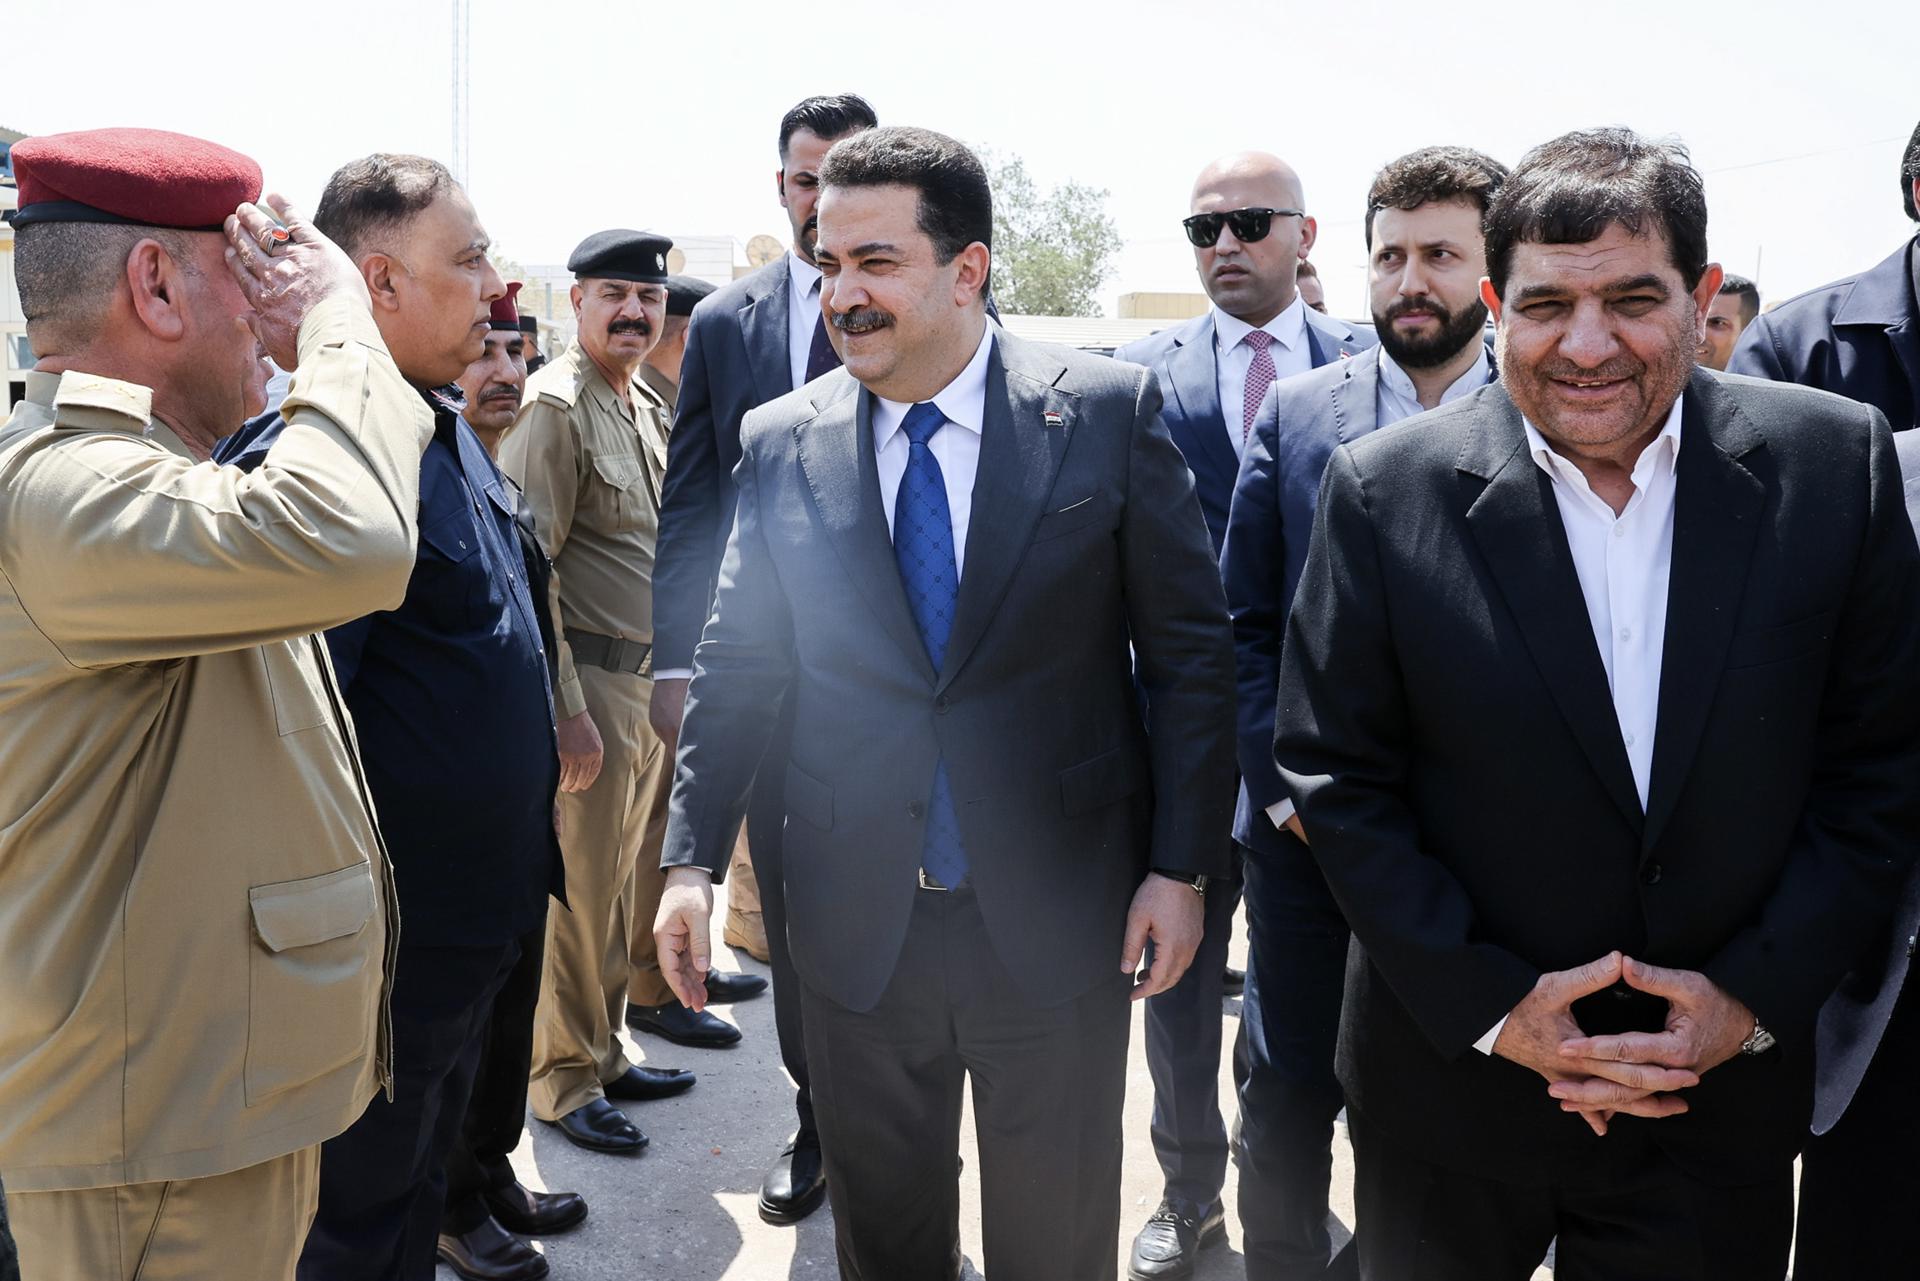 A handout picture made available by the Iranian Vice Presidency shows Iranian Vice President Mohammad Mokhber (R) and Iraqi Prime Minister Mohammed Shia' al-Sudani (C) greeting officials on the sidelines of an unveiling ceremony to launch the construction of the joint Shalamcheh-Basra railway project, at the Shalamcheh-Basra border crossing in the southern province of Basra, in Basra, Iraq, 02 September 2023 (issued 03 September 2023). EFE-EPA/IRANIAN VICE PRESIDENCY / HANDOUT HANDOUT EDITORIAL USE ONLY/NO SALES